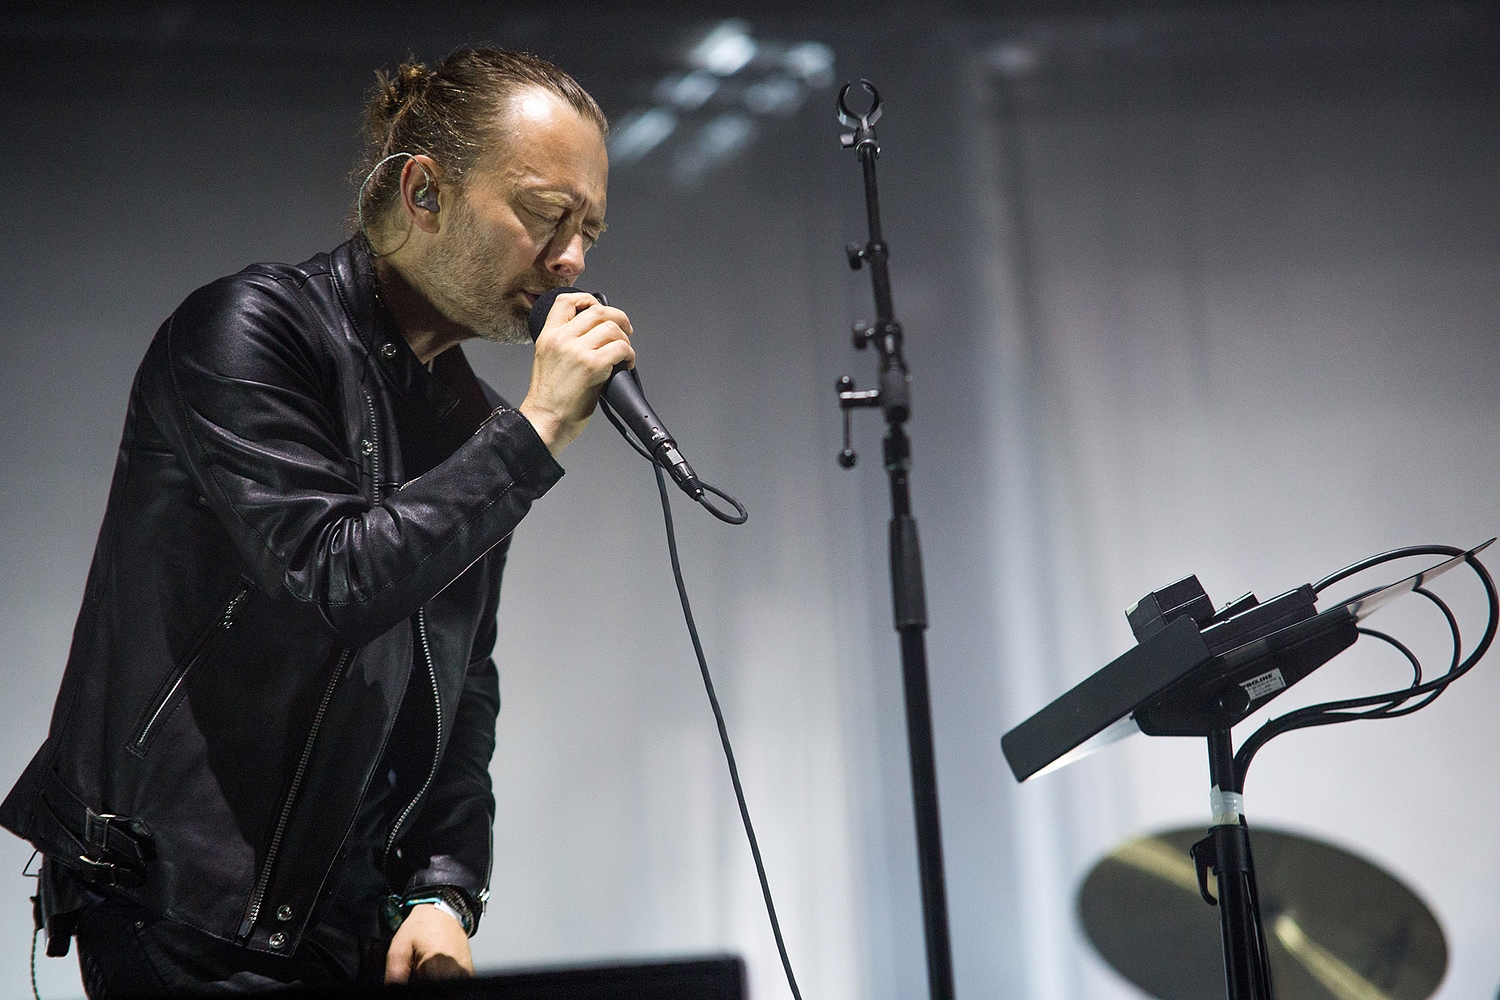 Radiohead briefly covered The Smiths at Austin City Limits